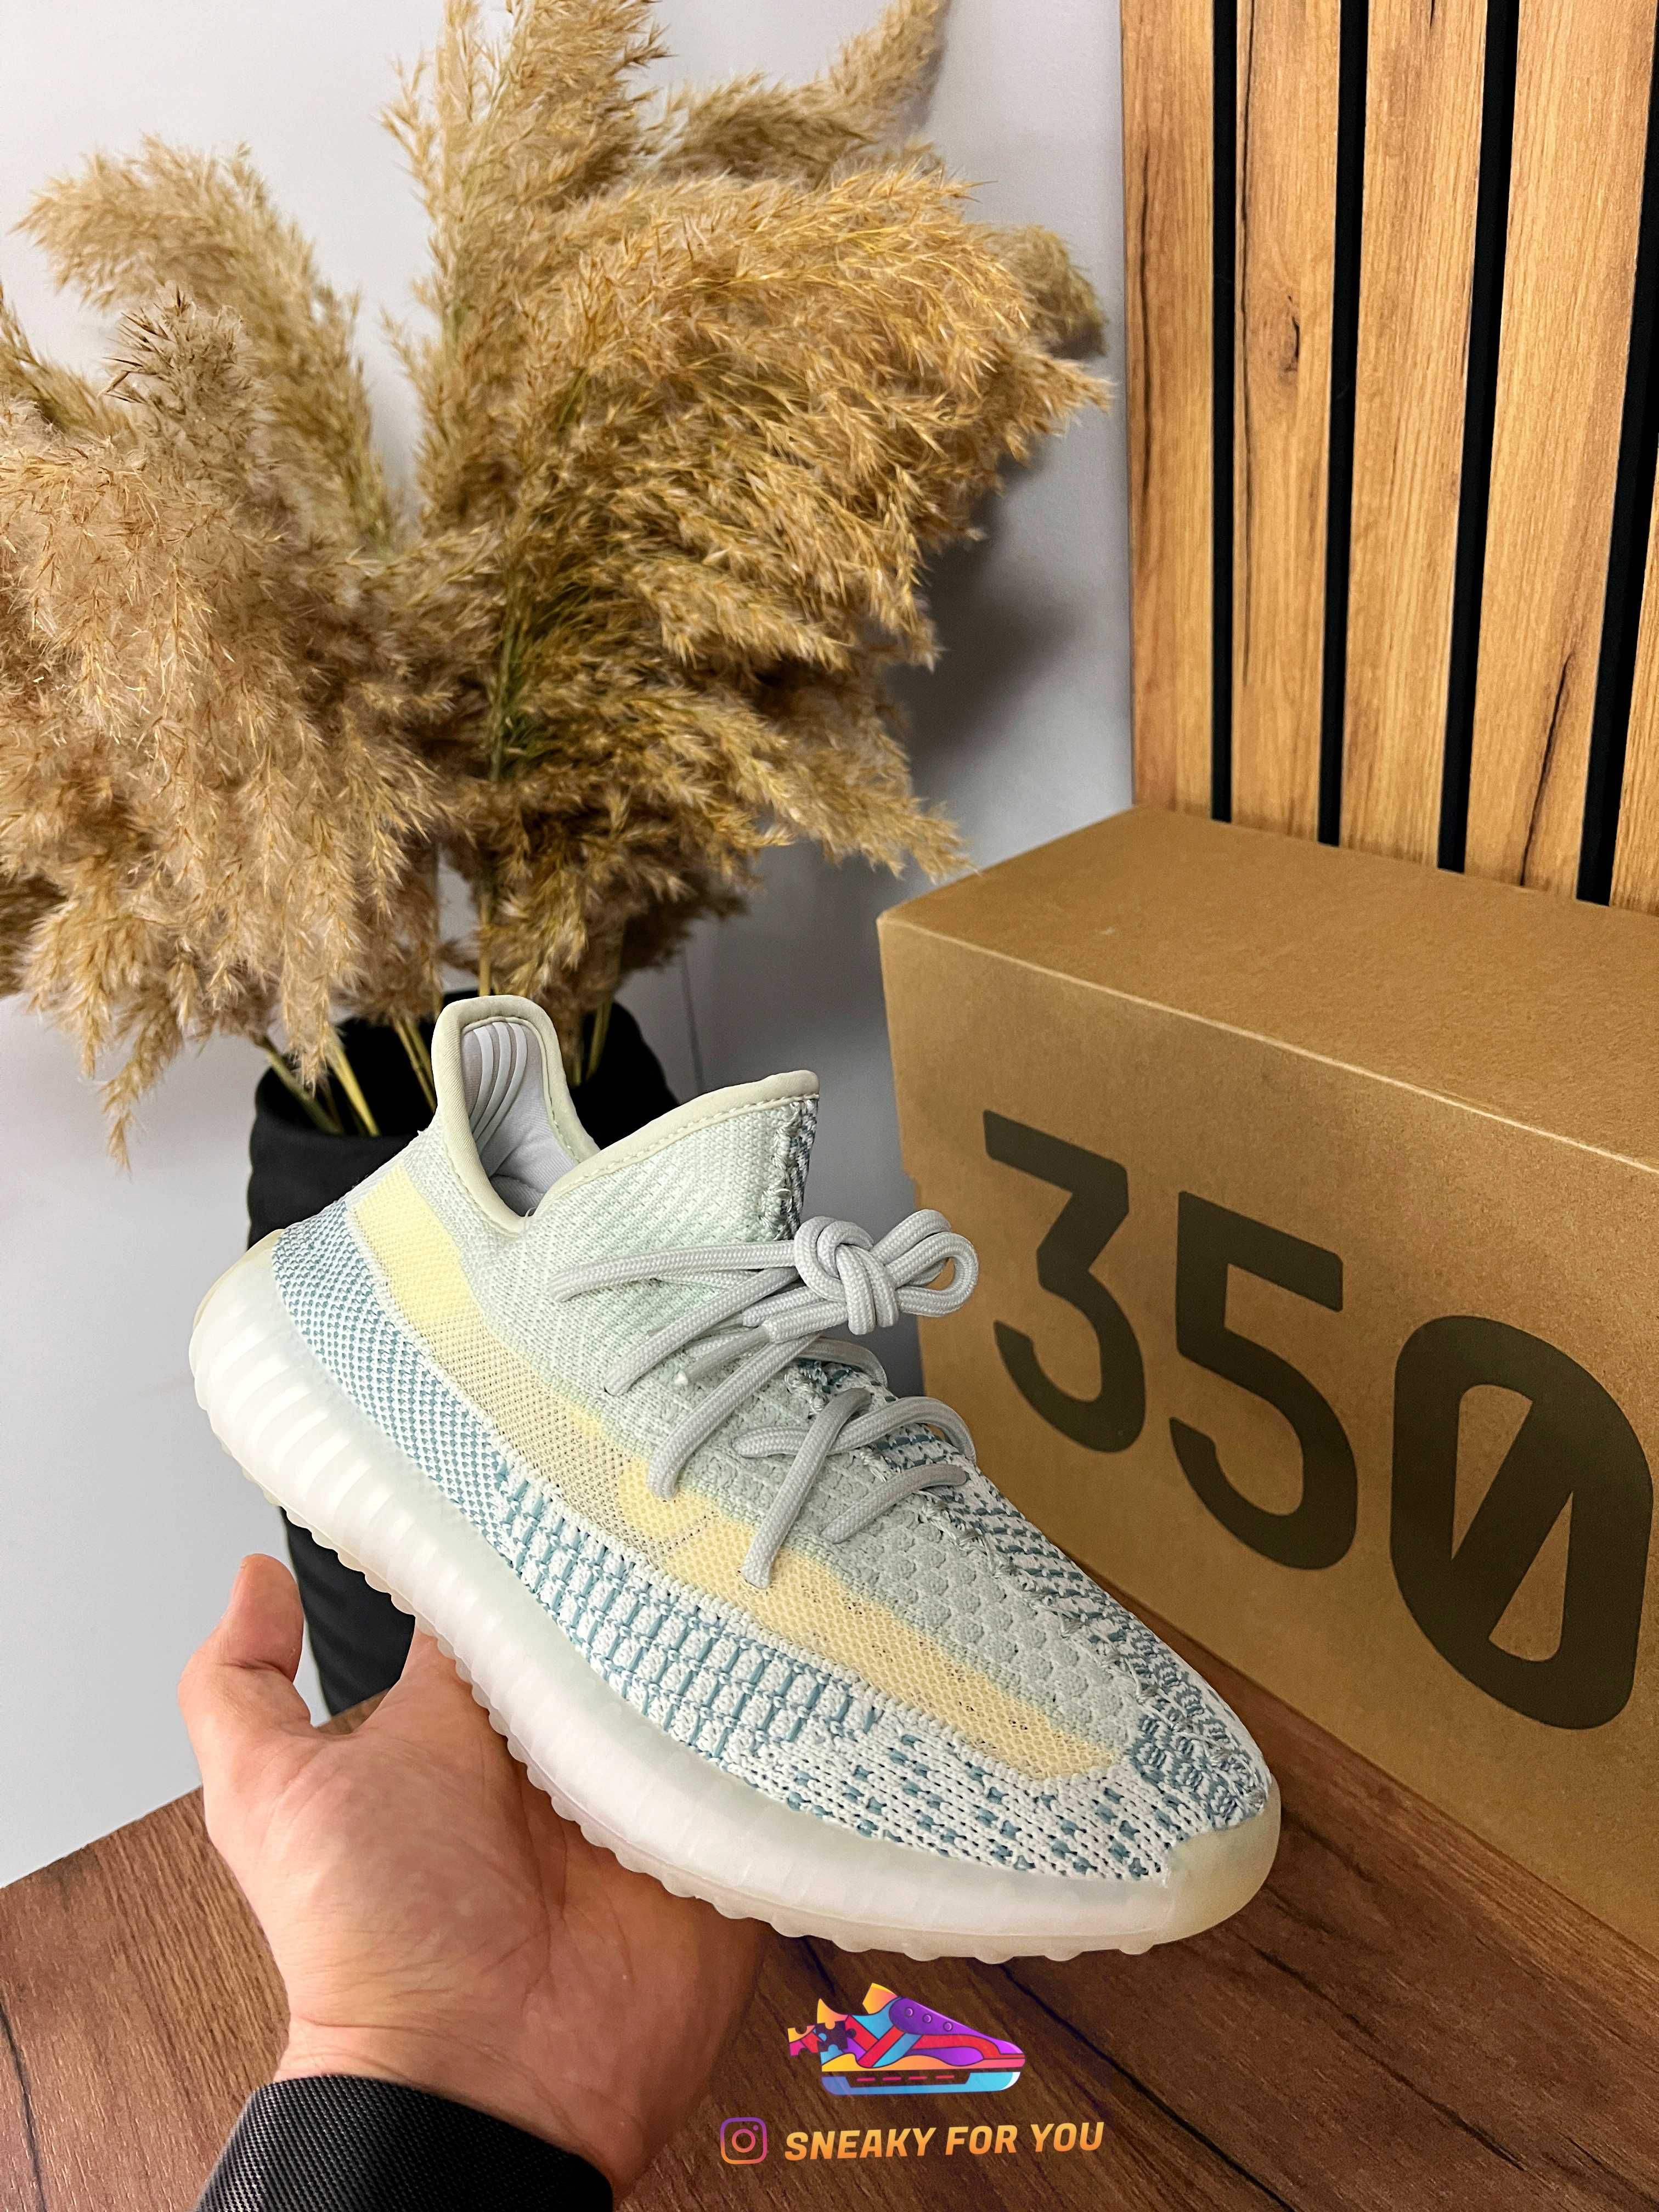 36-43 Adidas Yeezy Boost 350 V2 Cloud White